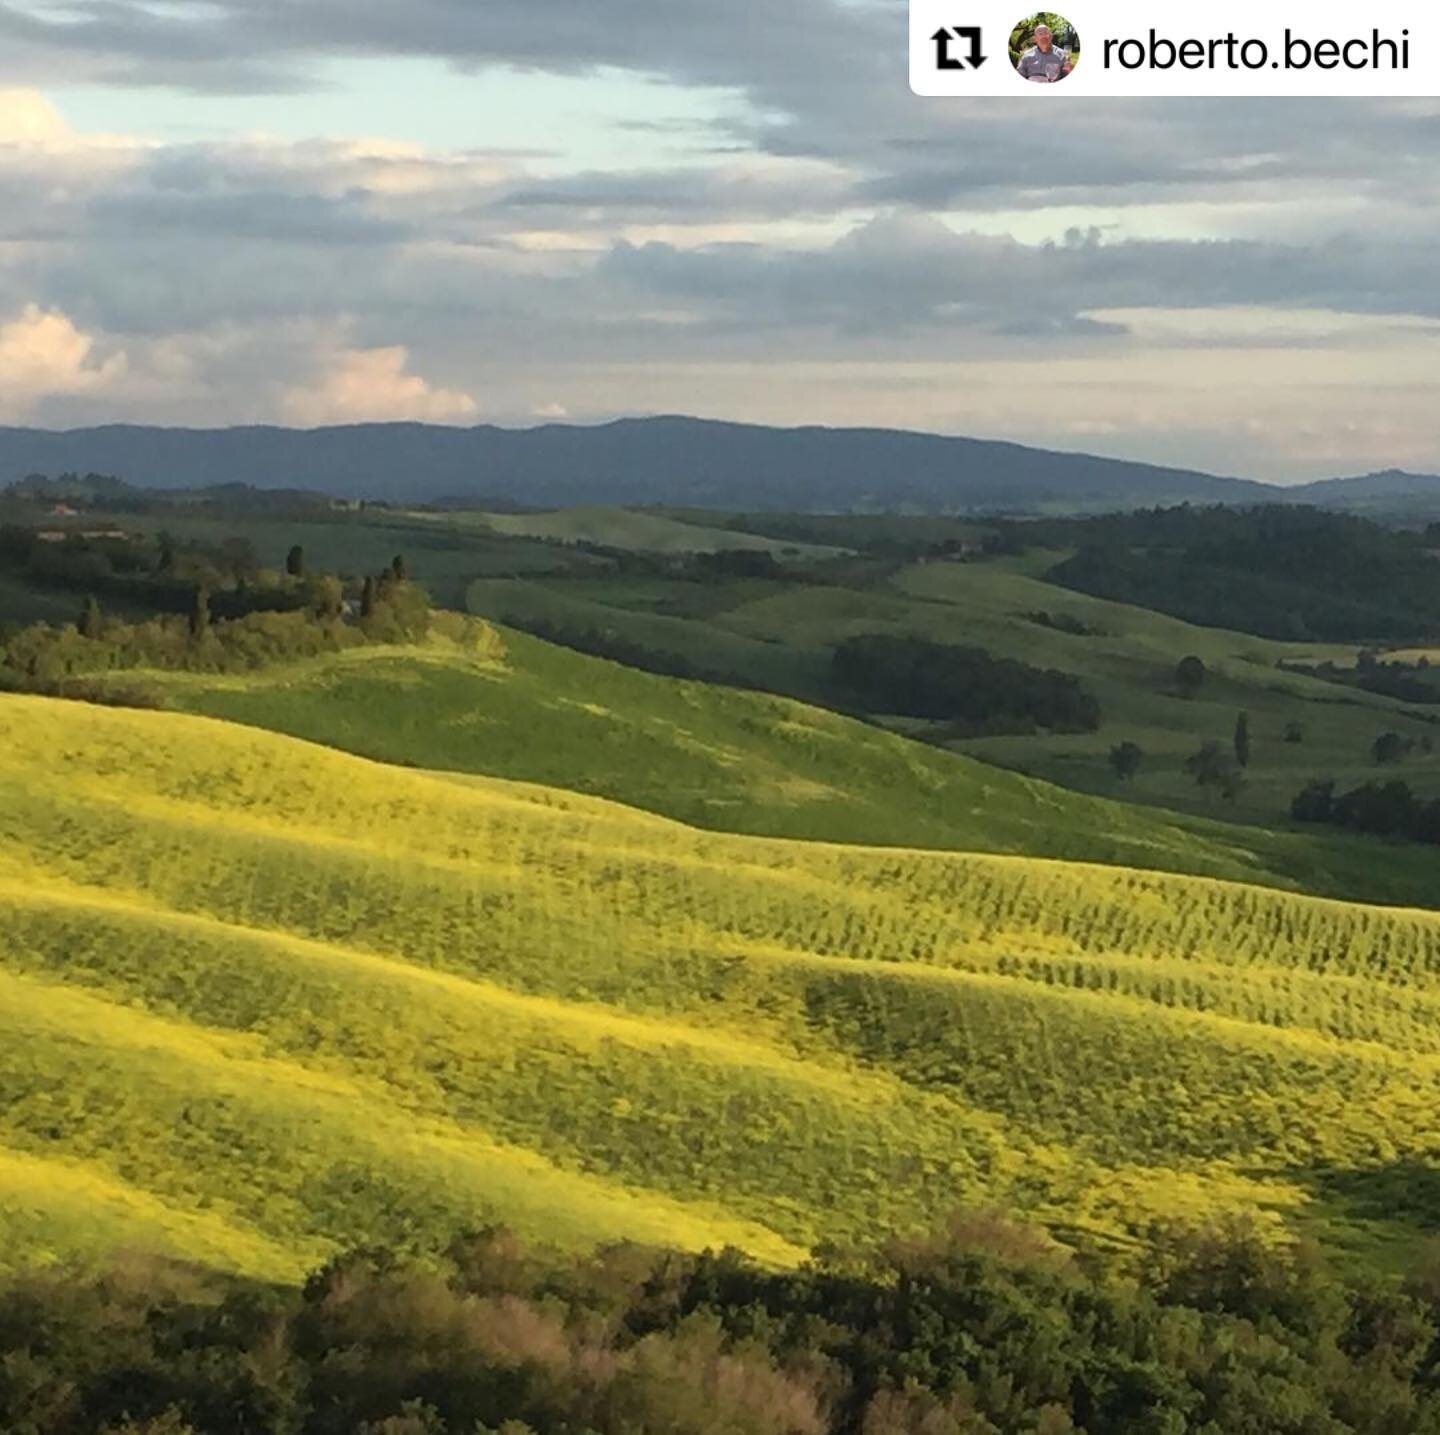 No filter here in Tuscany! GC member @roberto.bechi adds some green to our very blue feed!

Dreaming of Tuscany right now?

#Repost @roberto.bechi with @make_repost
・・・
Tuscany without  filters !
#tuscany #hillcountry #hillside#countryside #landscape